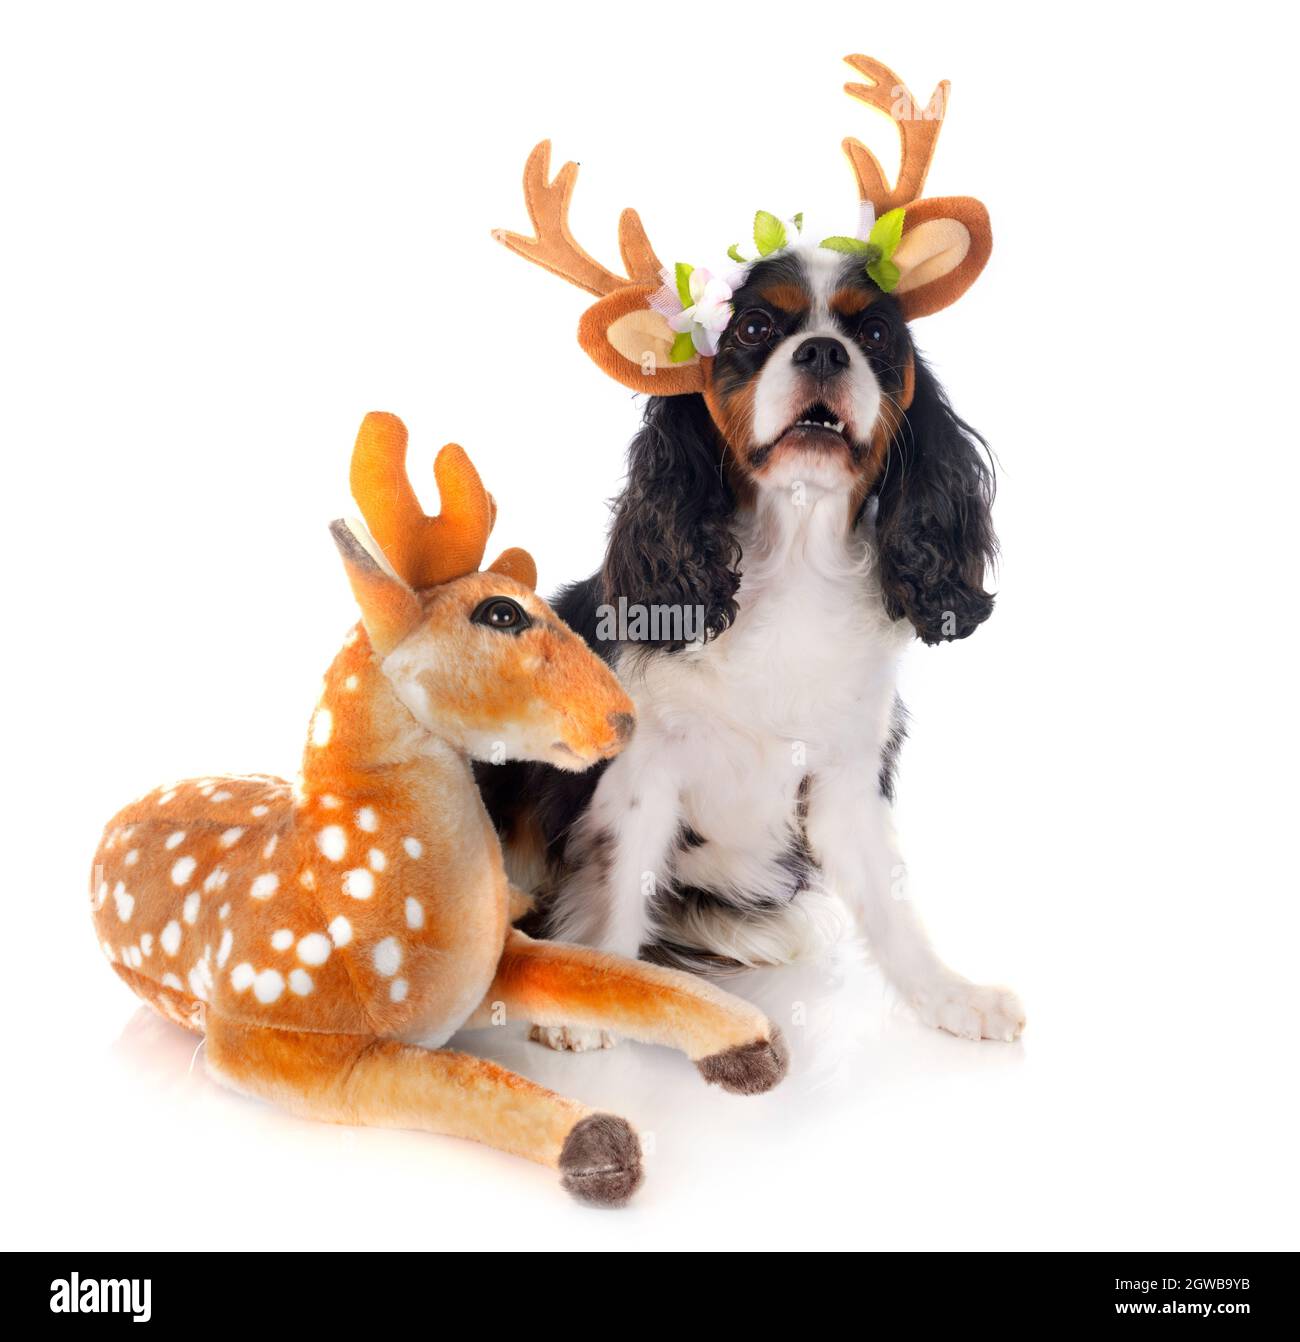 High Angle View Of Dog With Stuffed Toy Over White Background Stock Photo